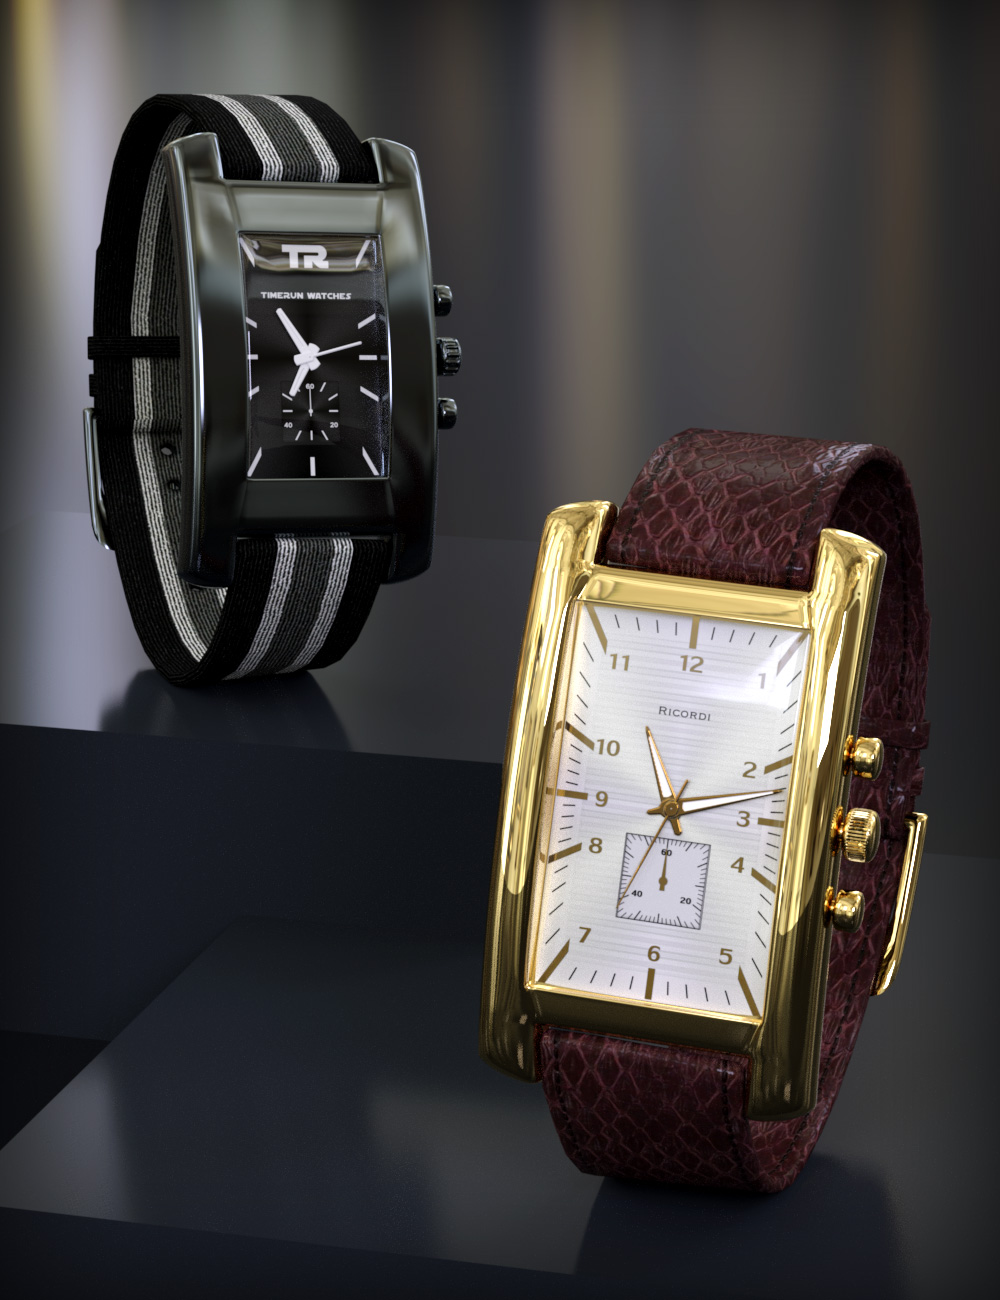 Varied Square Watches for Square Wristwatch by: esha, 3D Models by Daz 3D